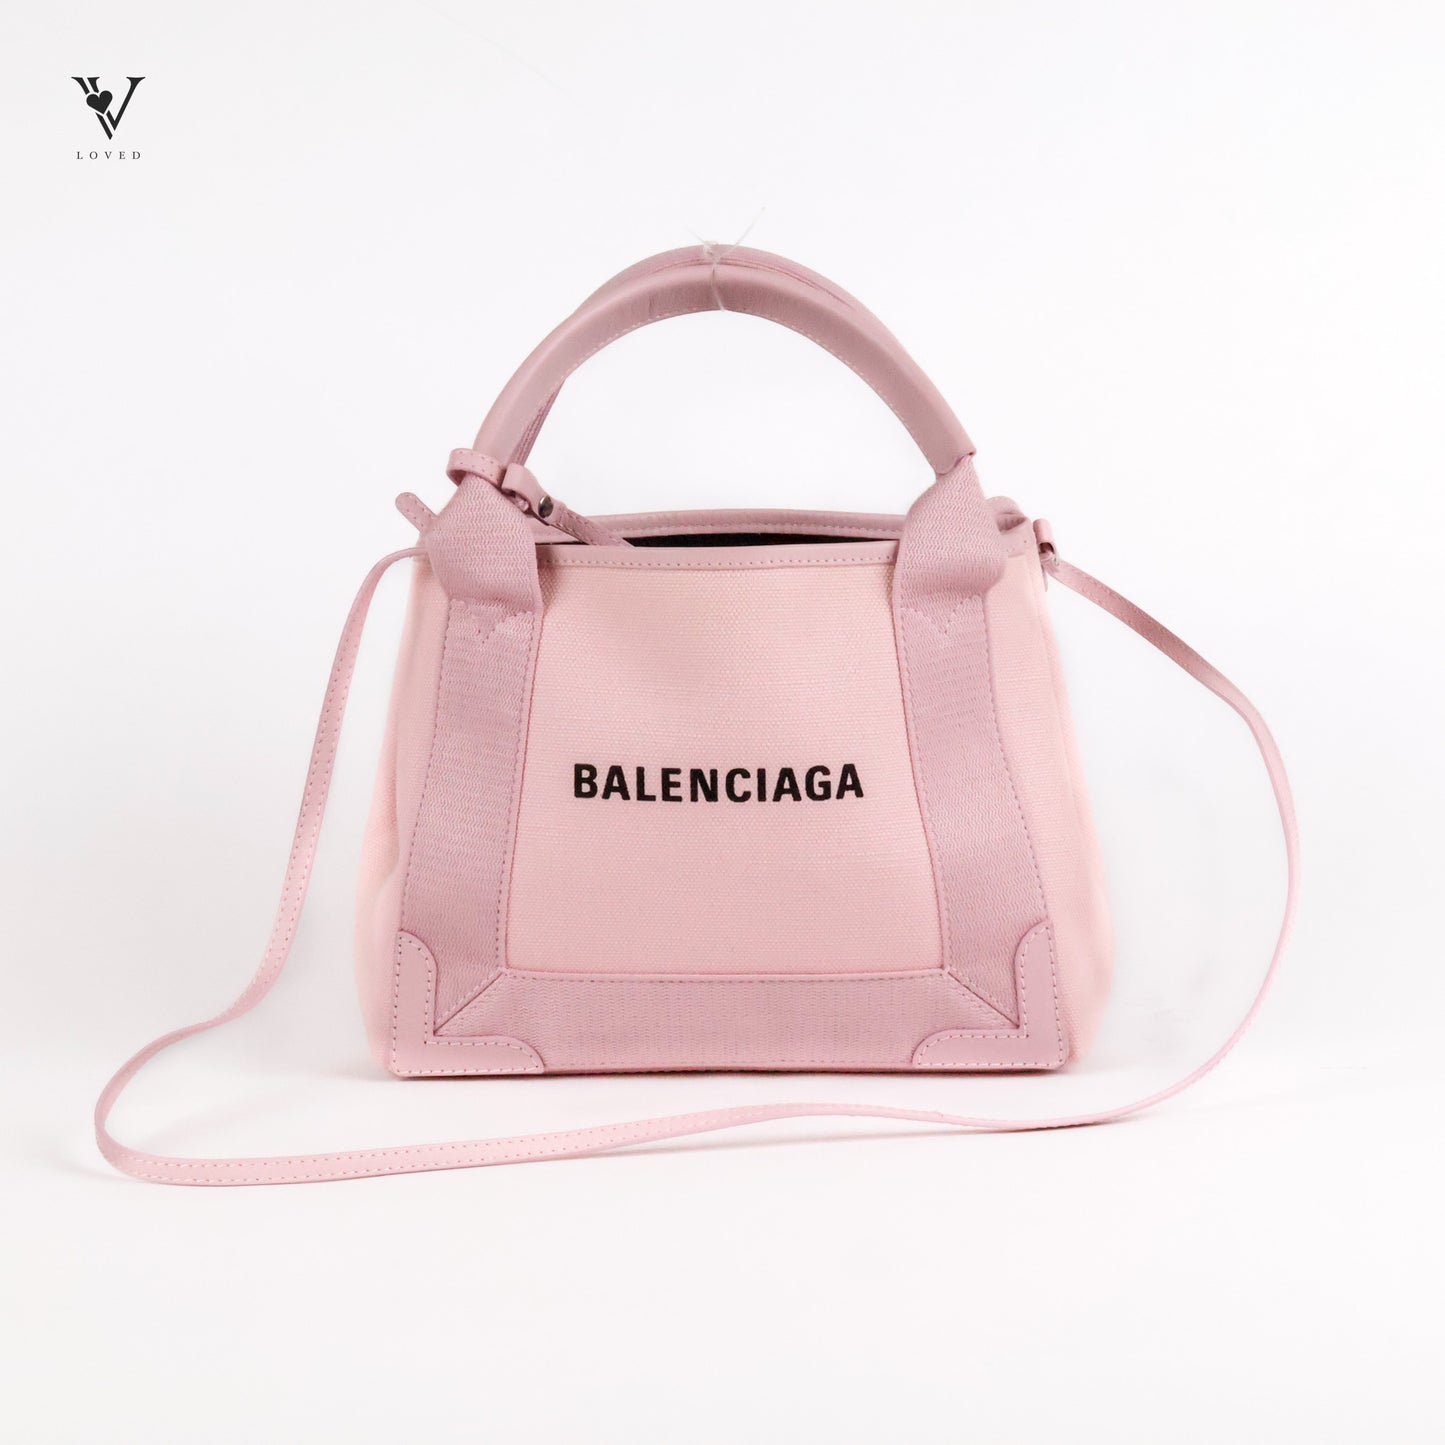 Cabas Two-Way Bag in Pink